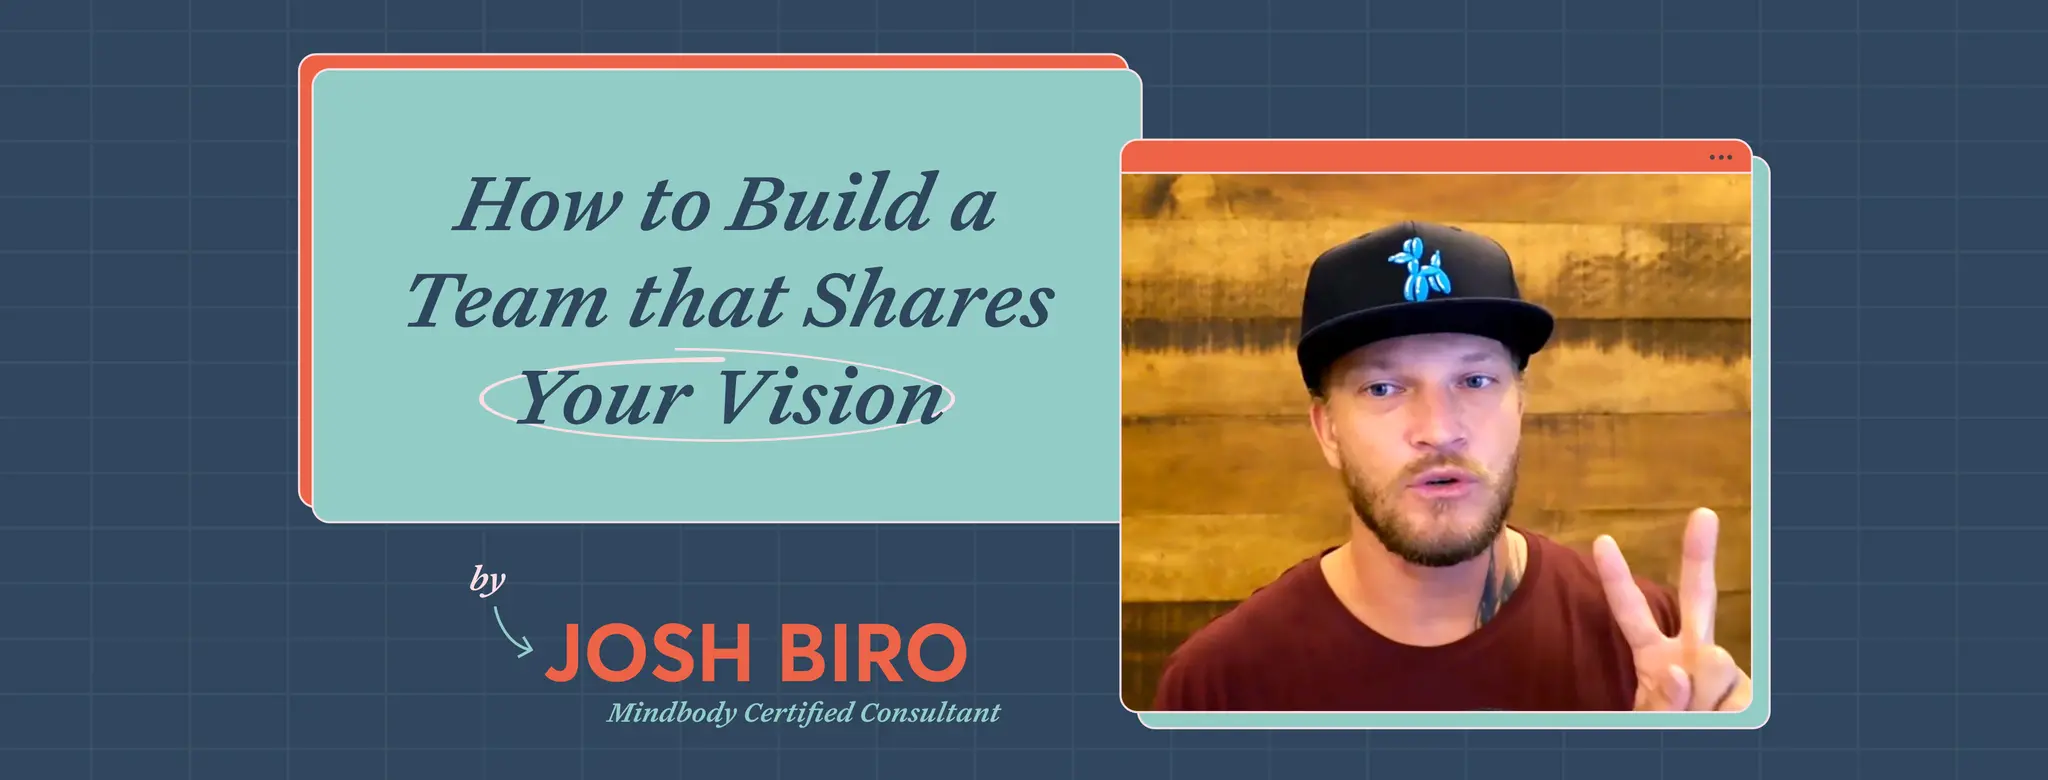 How to build a team that shares your vision 